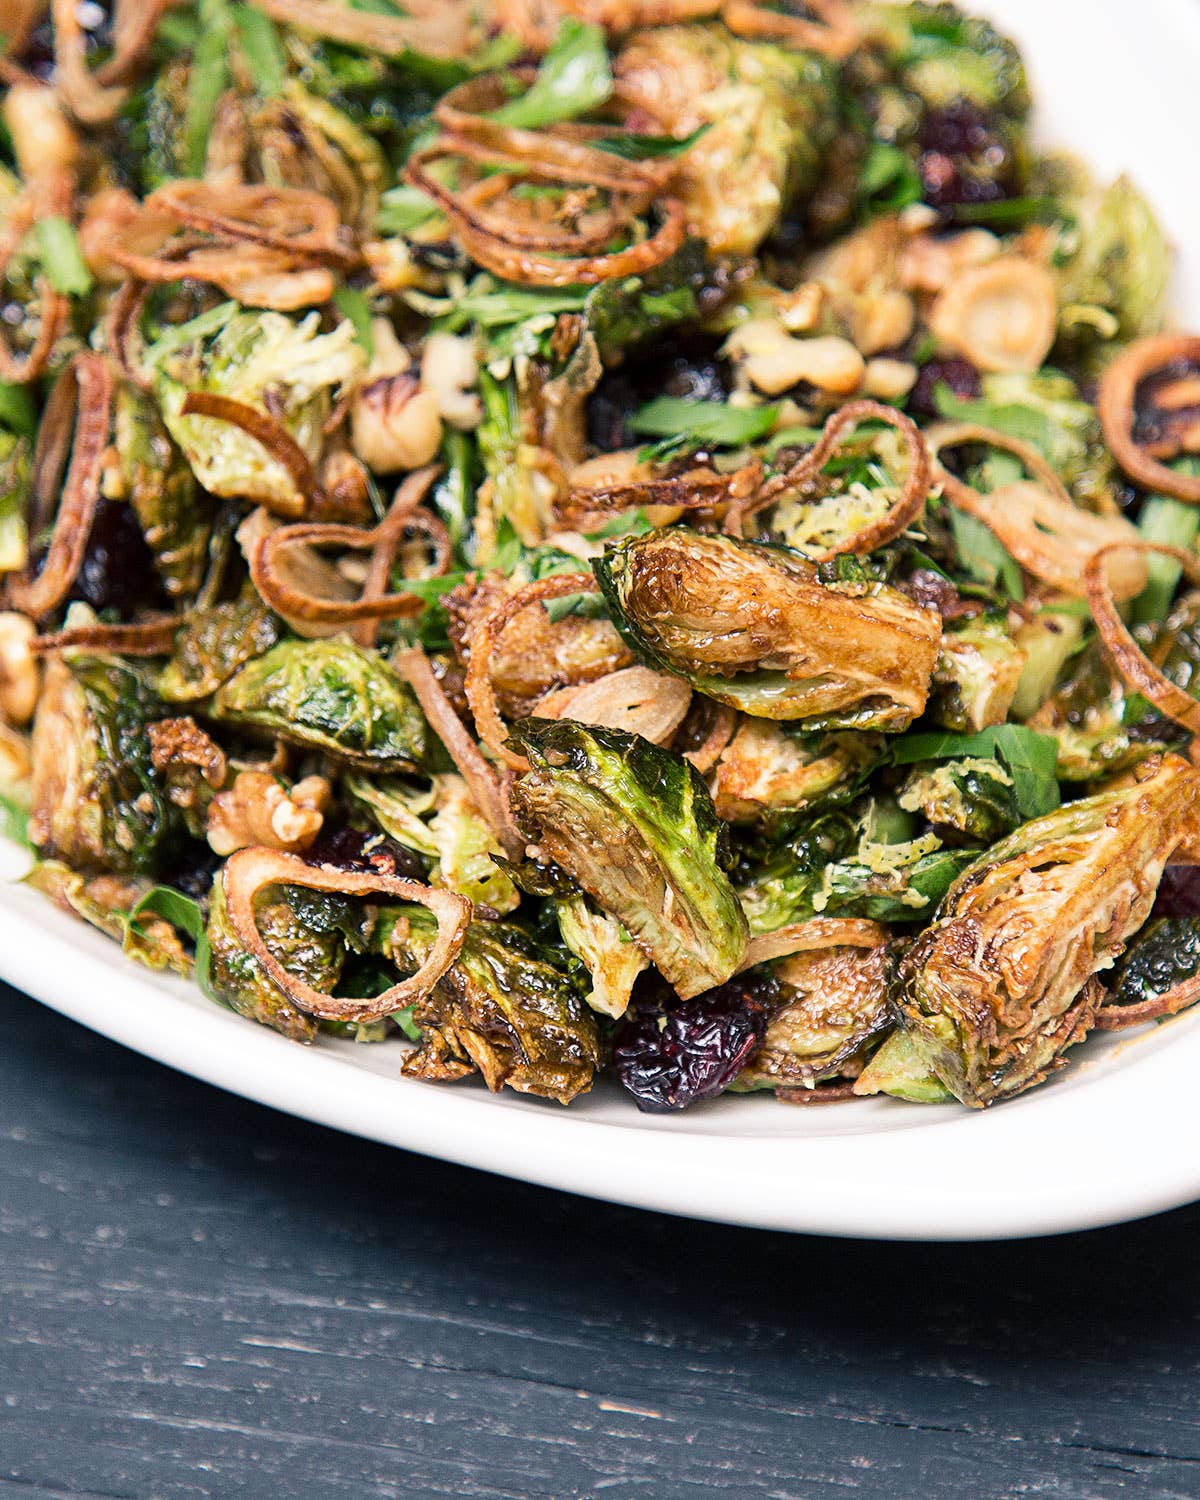 Why We Want You to Fry Your Brussels Sprouts